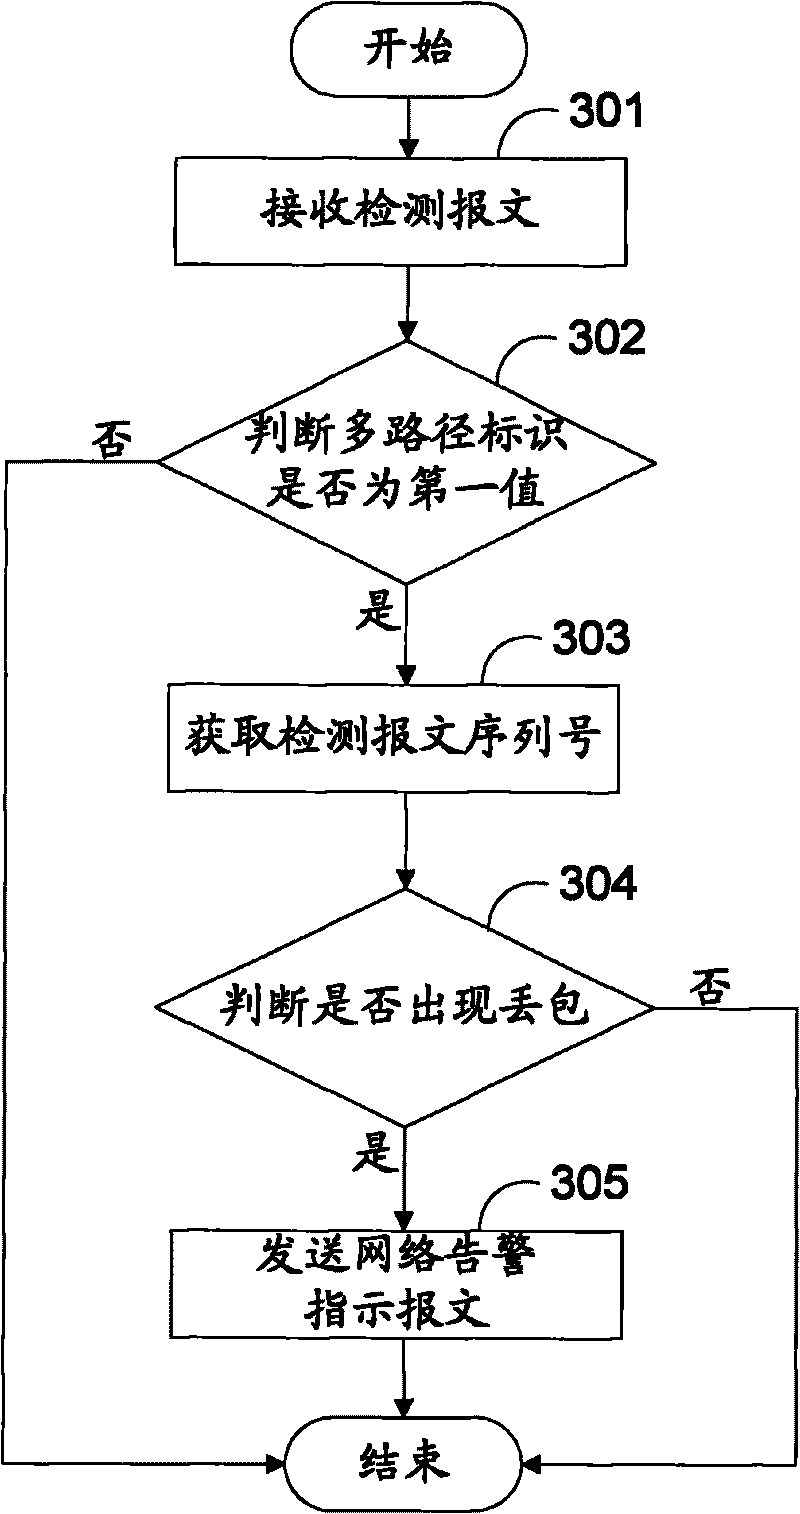 Method, device and system for detecting packet loss